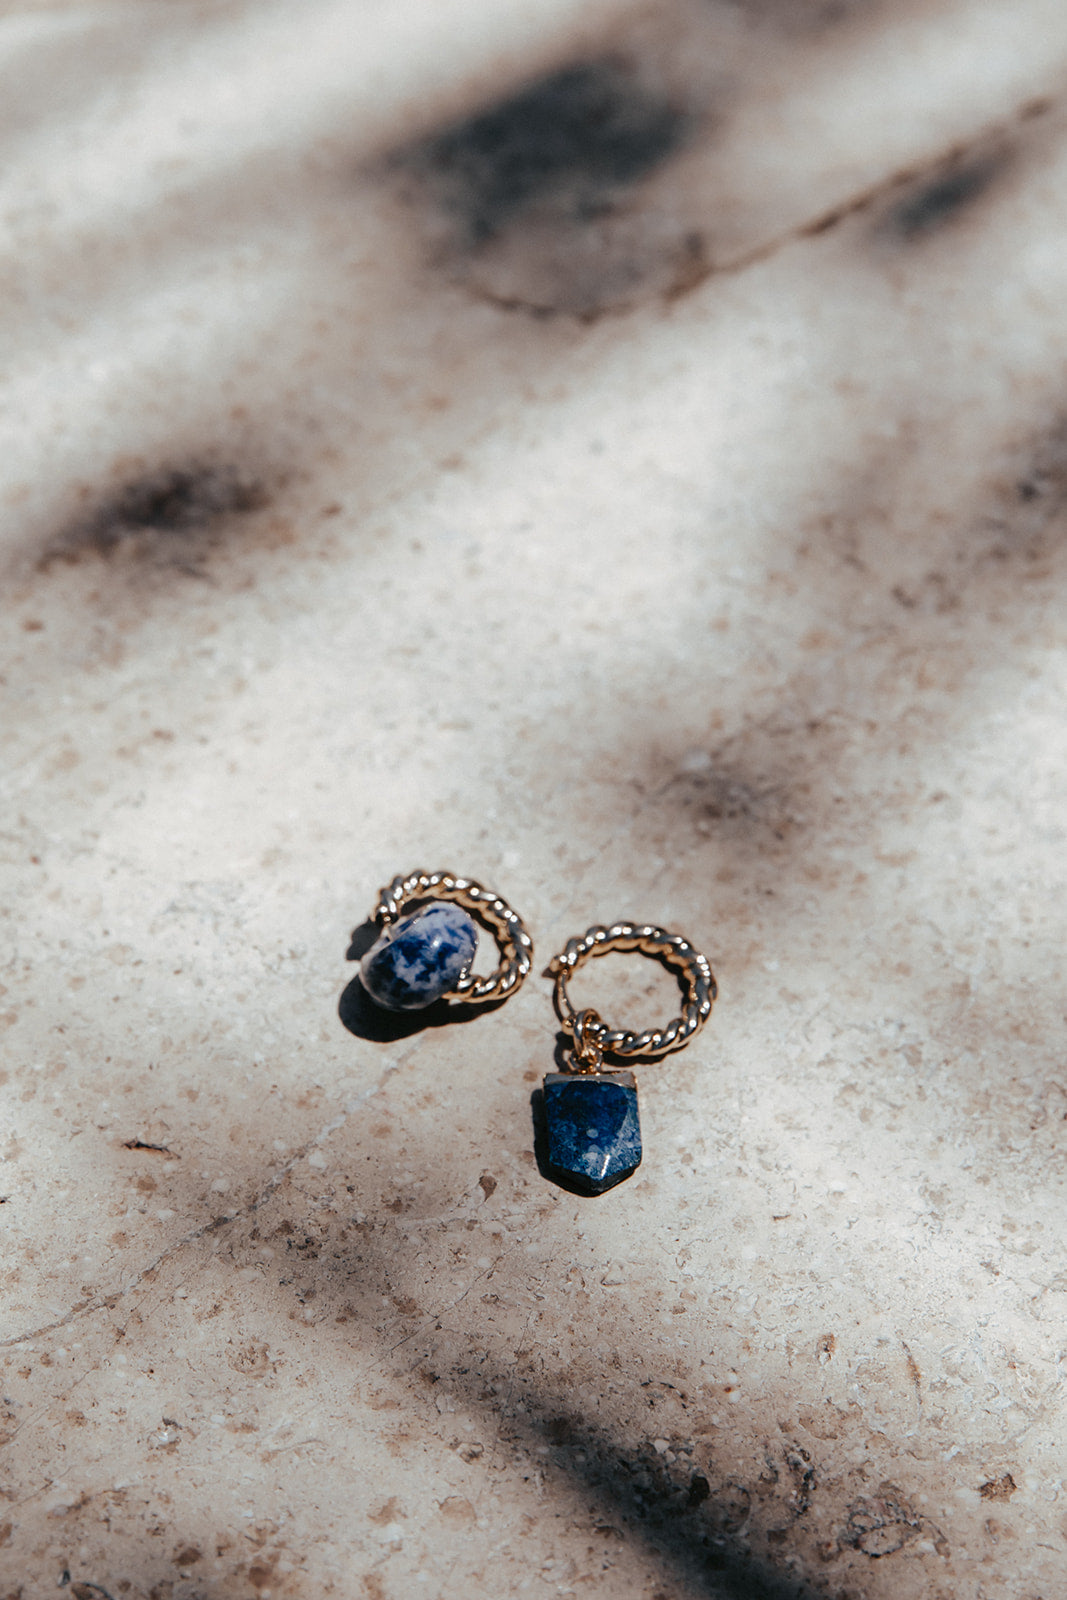 Earring with a blue semiprecious stone